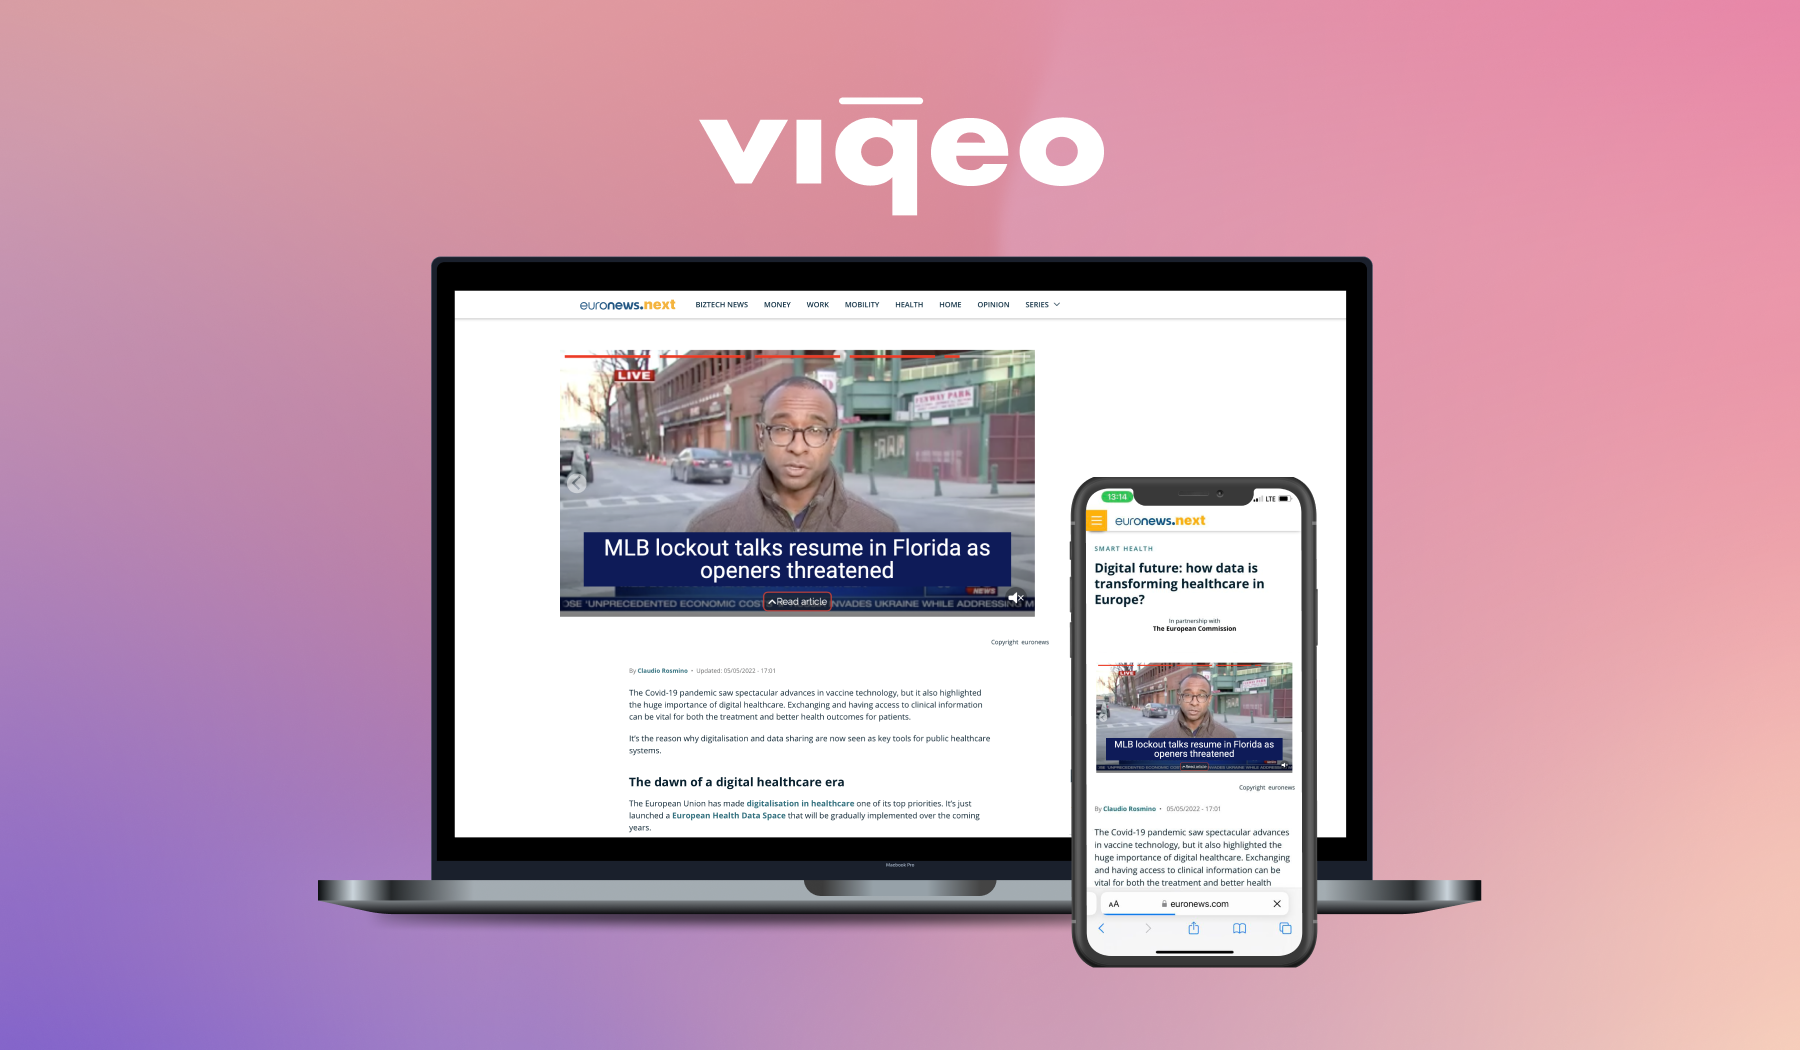 Viqeo highlights video in article